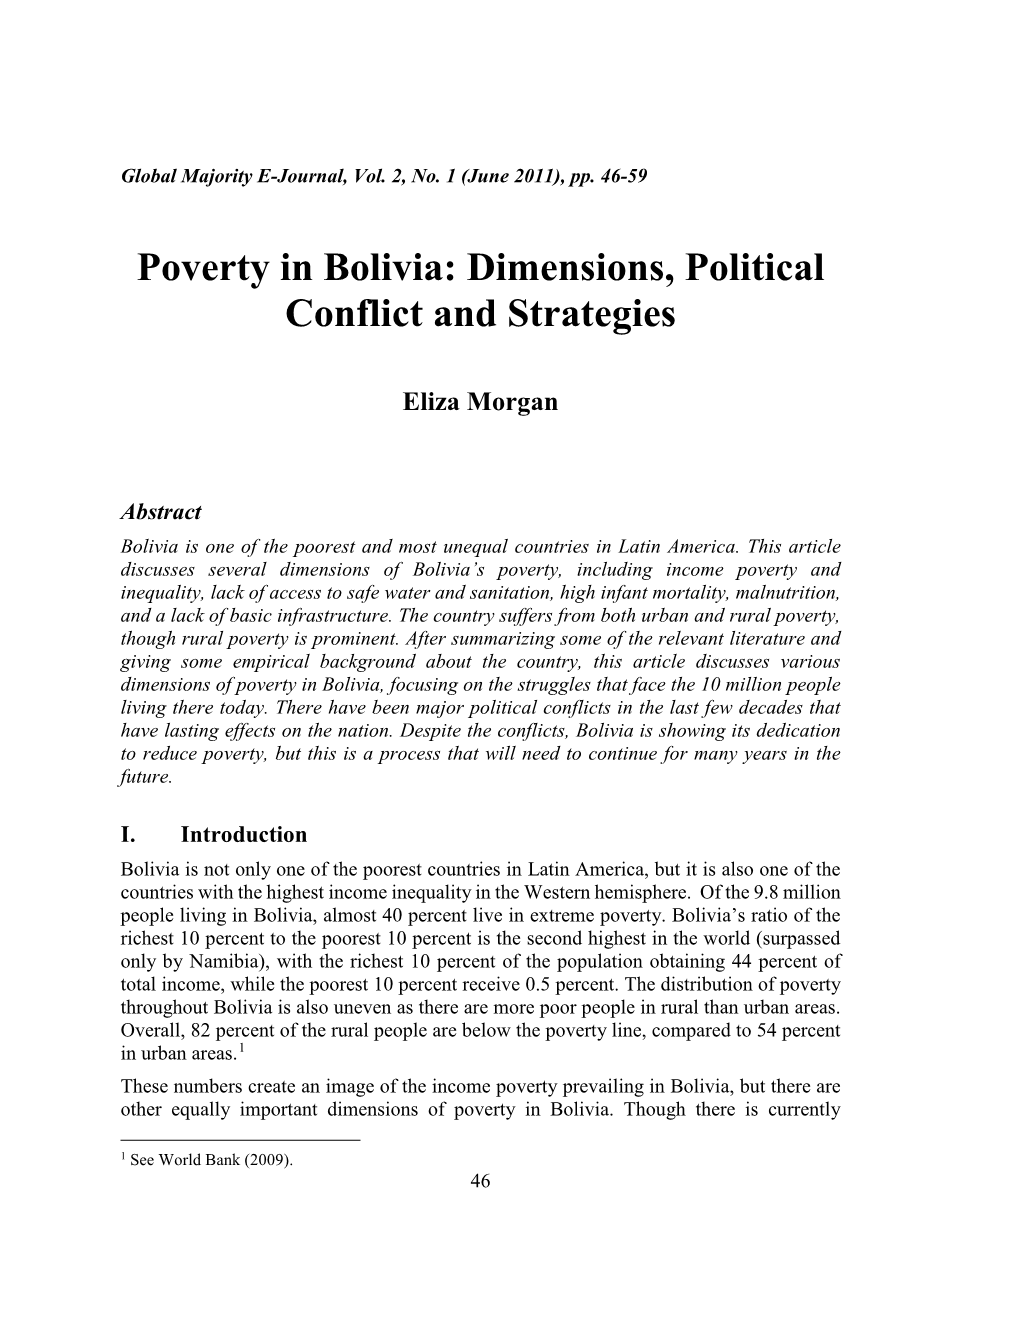 Poverty in Bolivia: Dimensions, Political Conflict, and Strategies